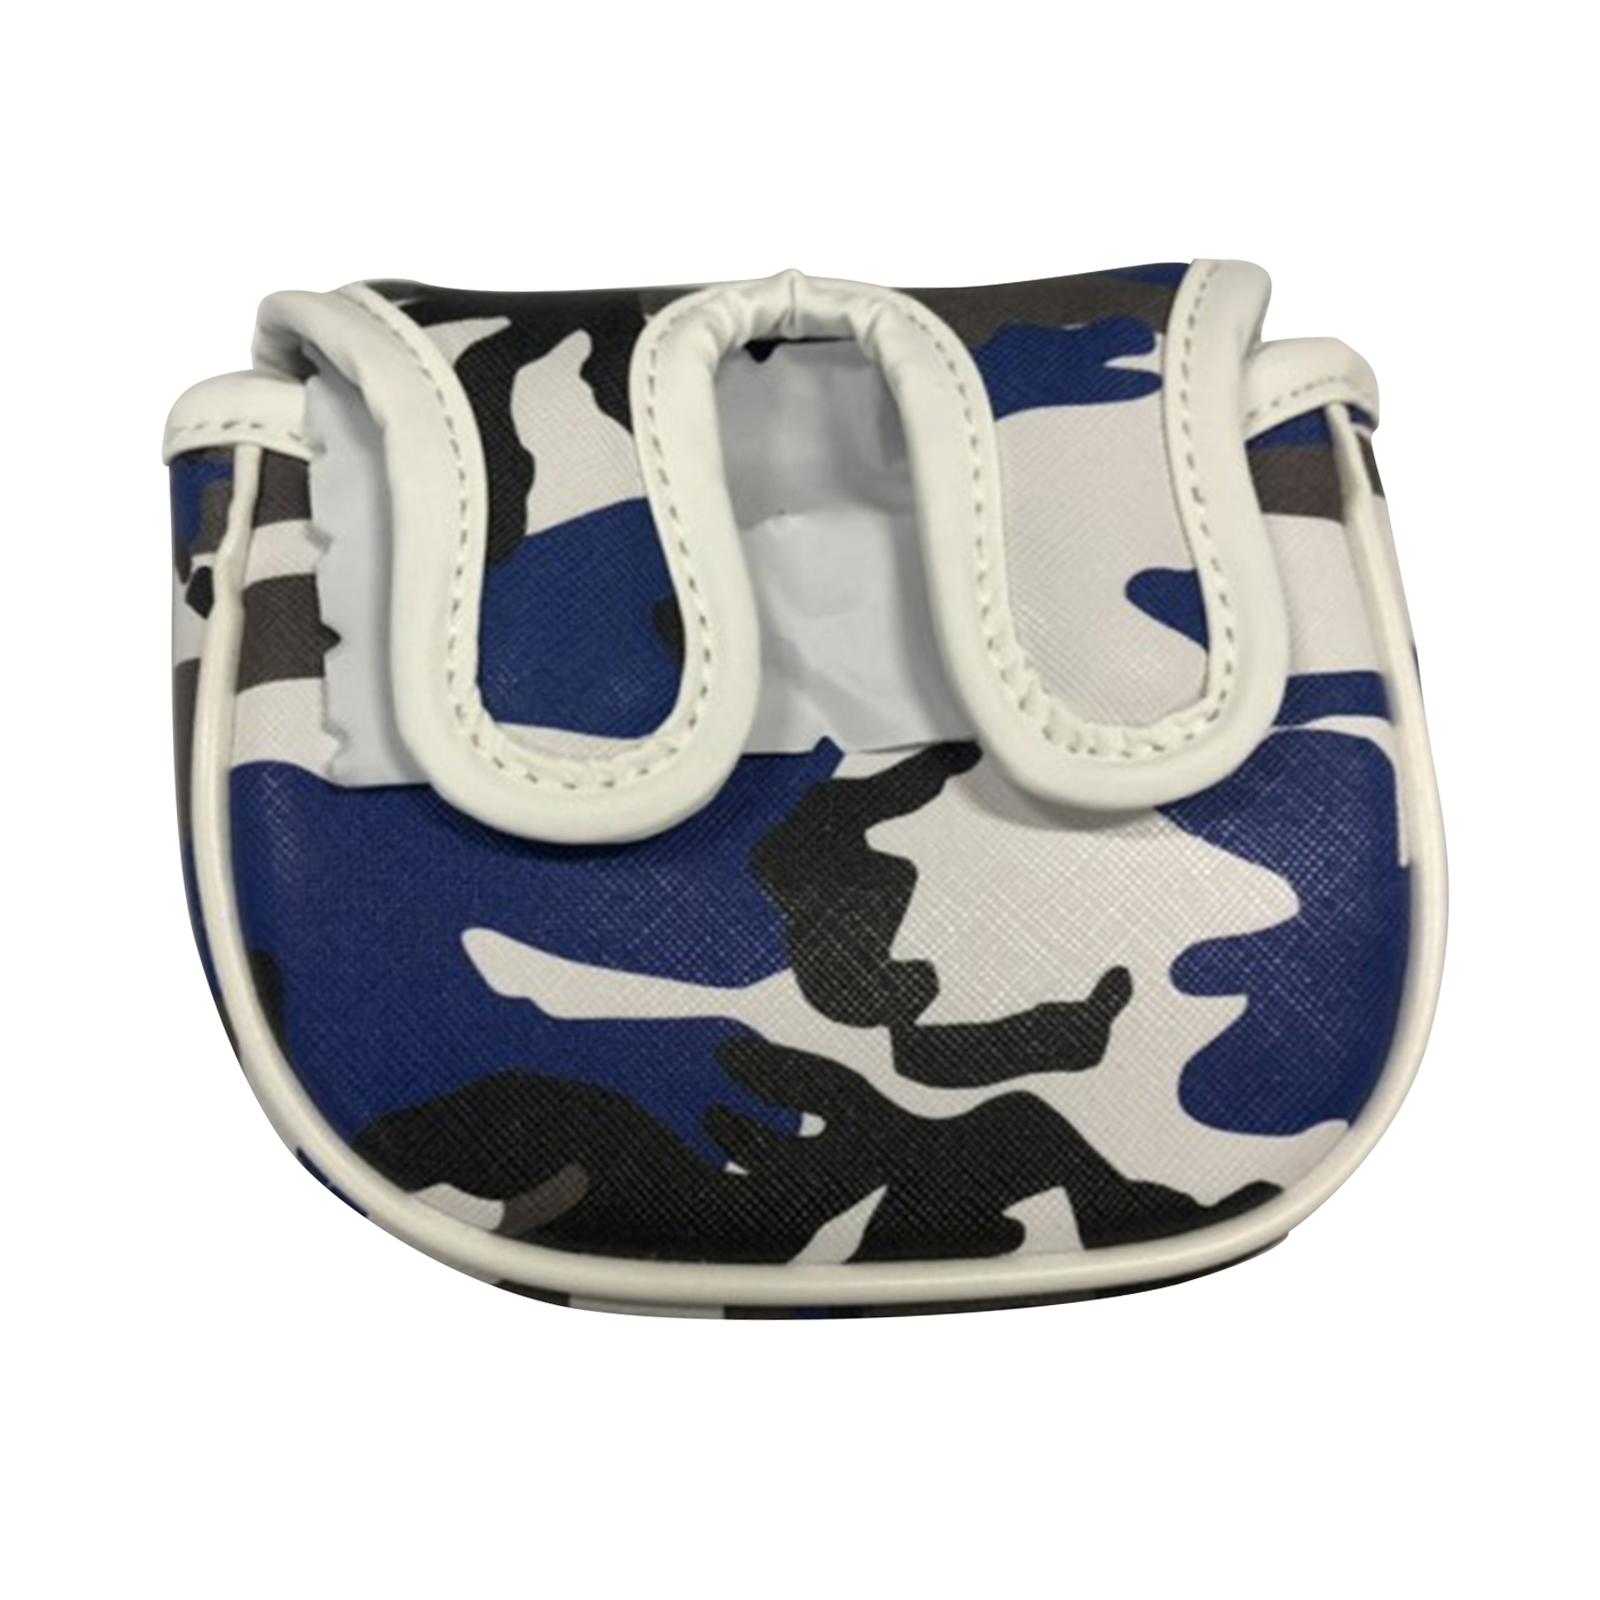 Golf Mallet Head Cover Putter Headcover with Magnetic Closure - Camouflage Blue